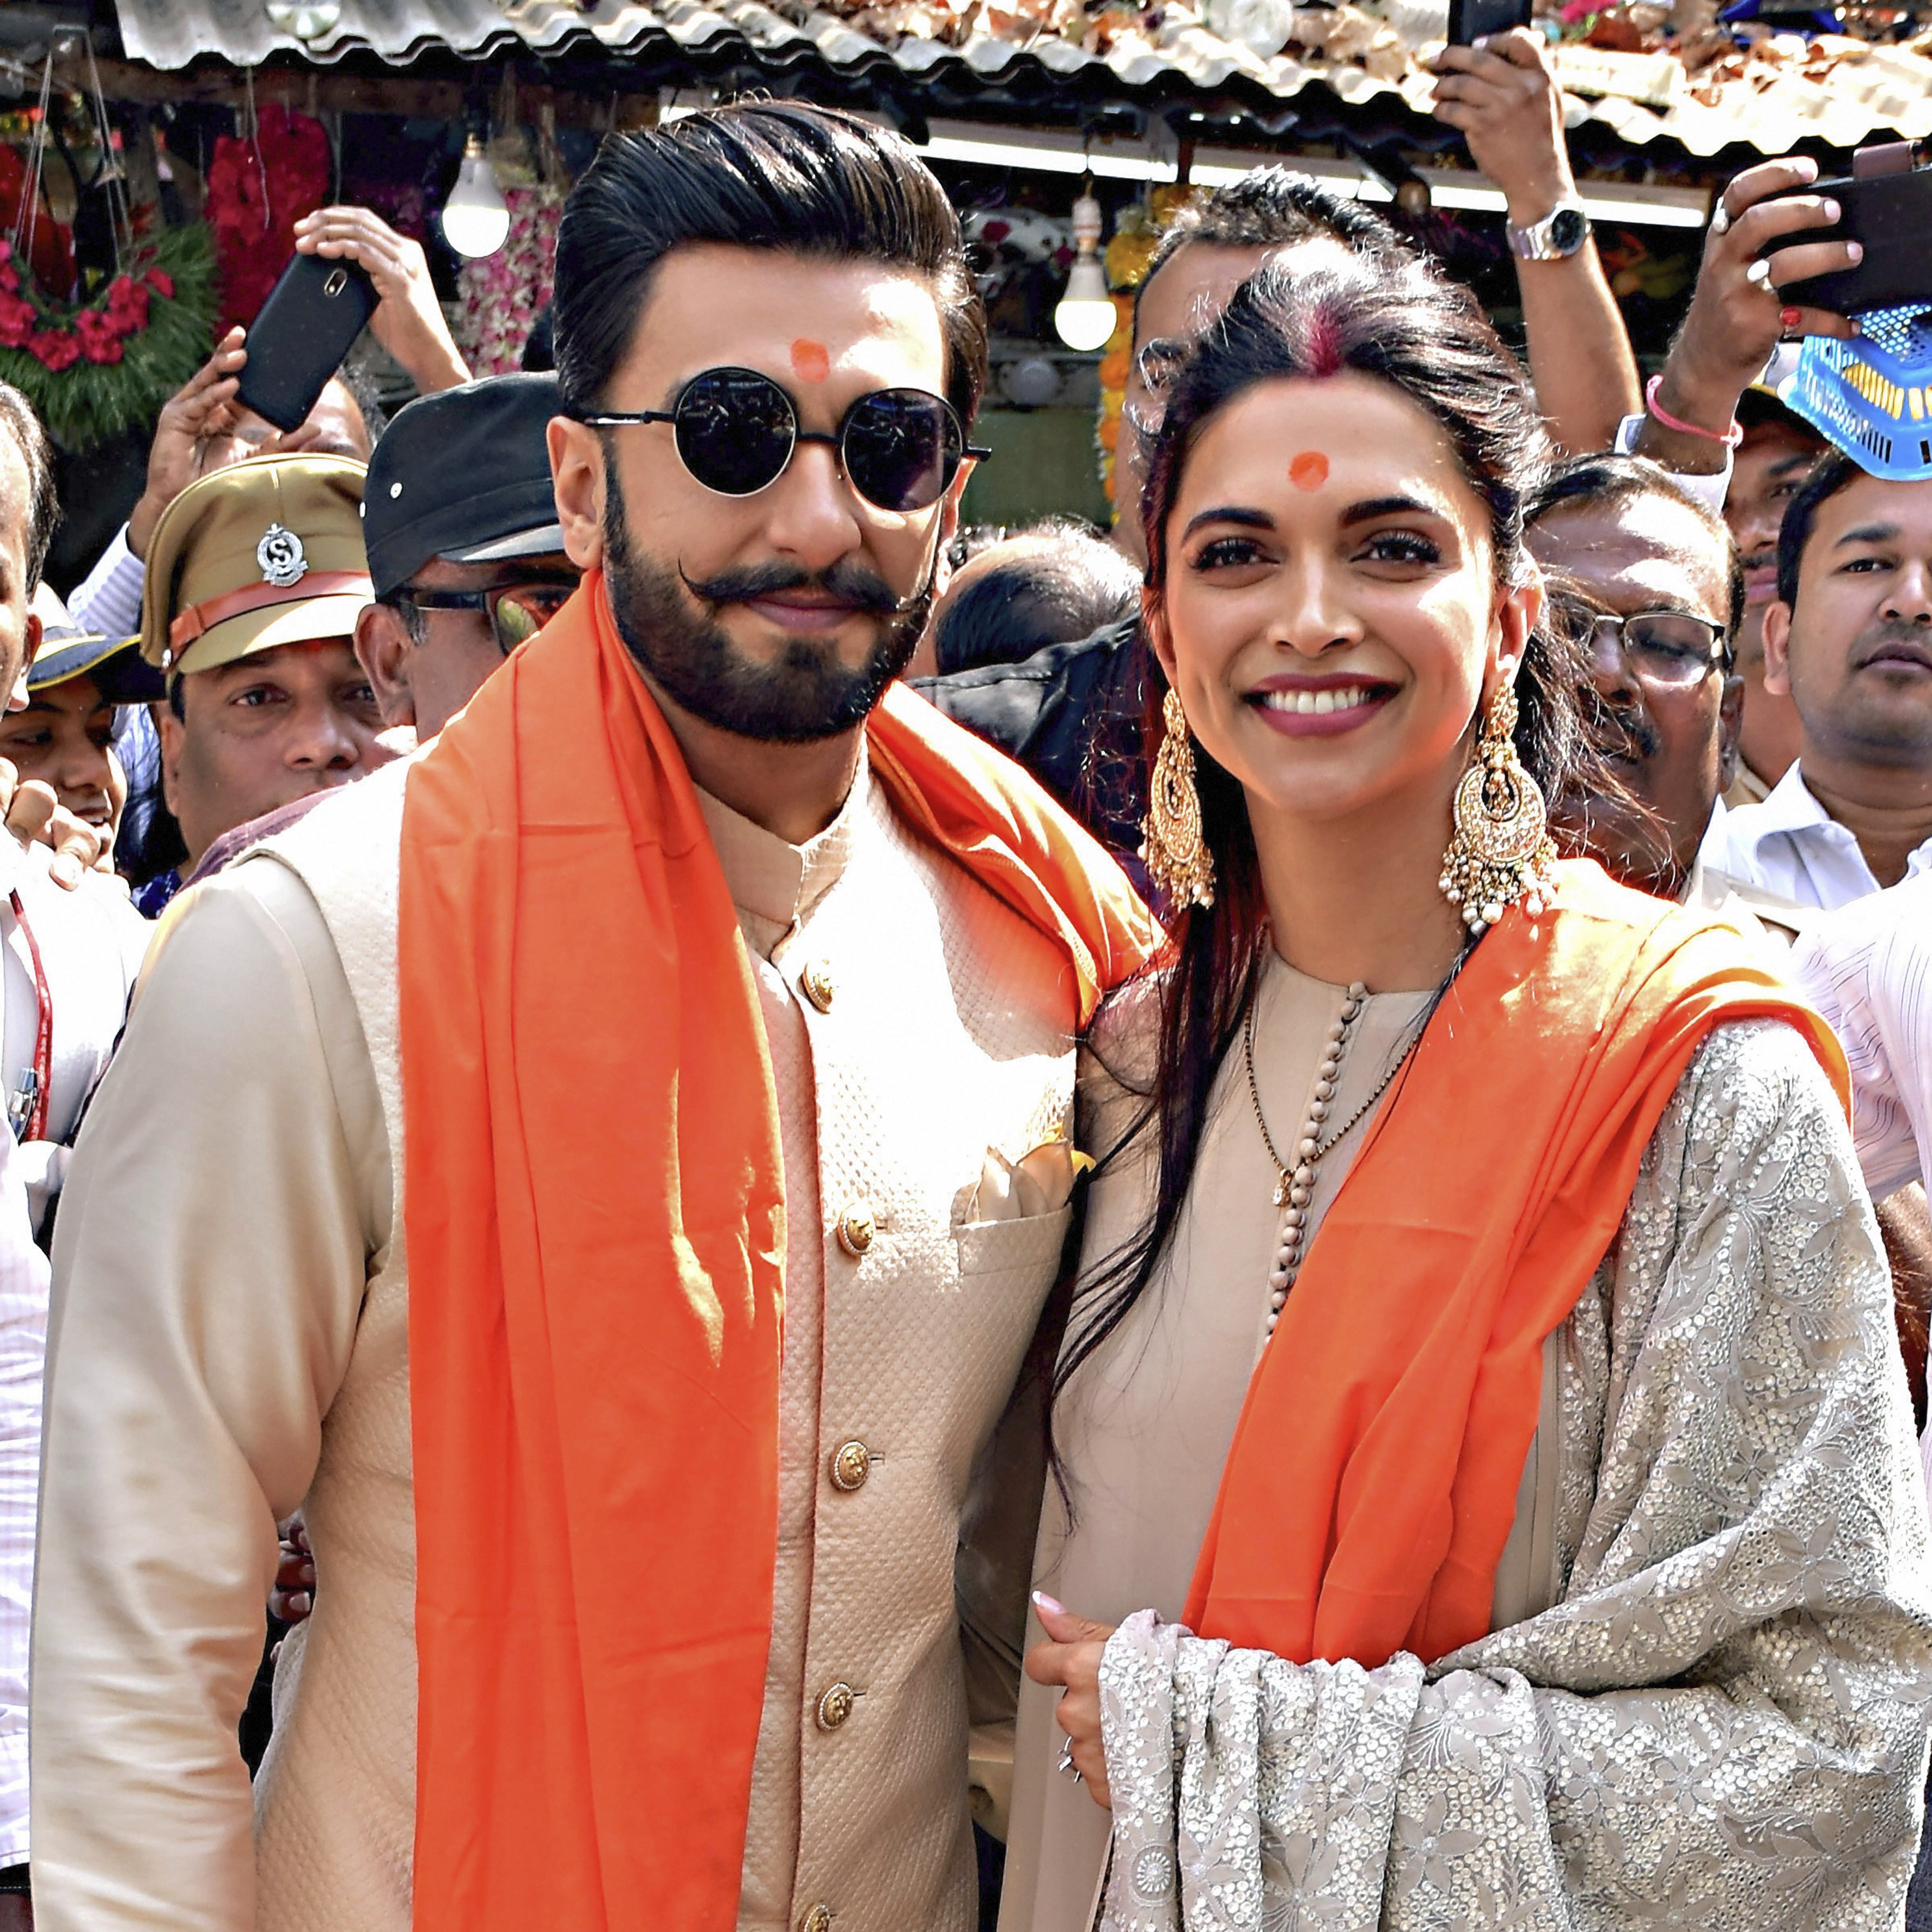 Newly-wed Bollywood actors Deepika Padukone and Ranveer Singh pose for photos on their visit to Siddhivinayak Temple, in Mumbai - PTI